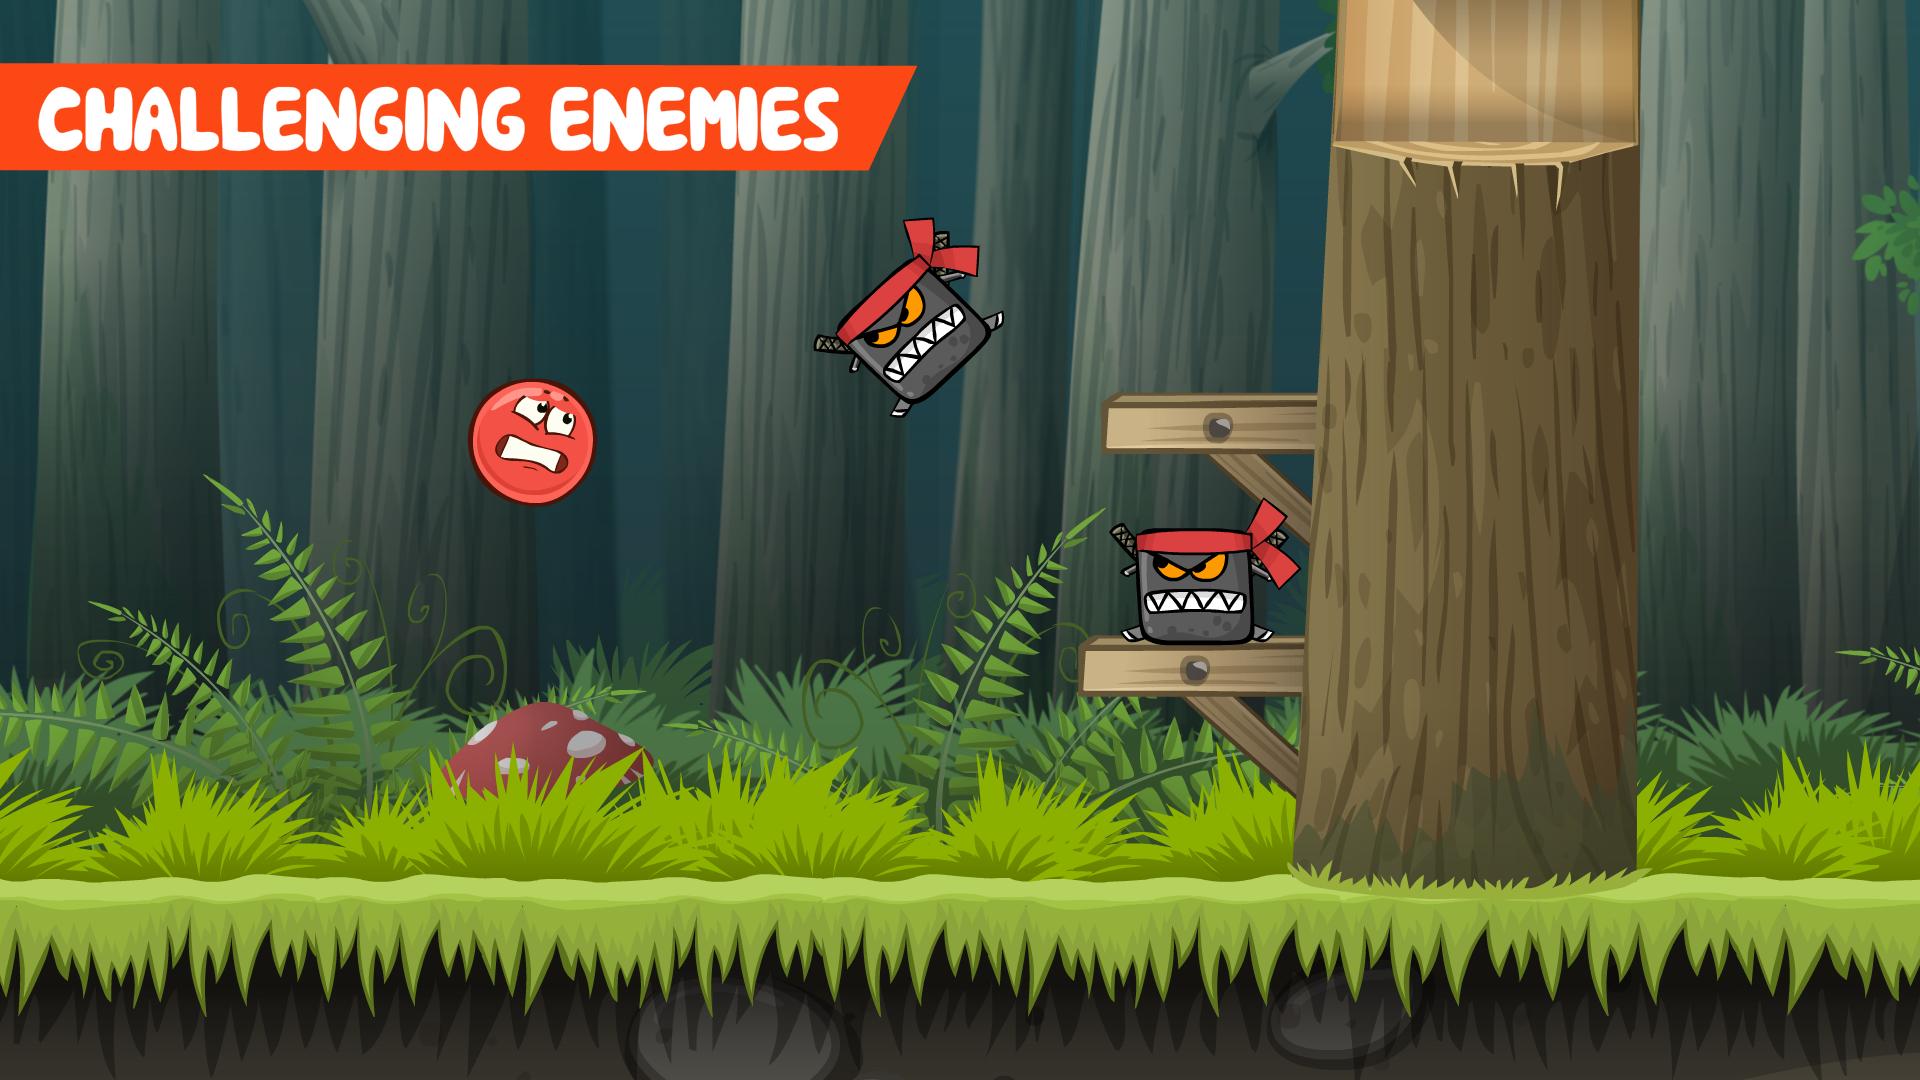 Red ball Adventure - Rolling ball 4 for Android - APK Download